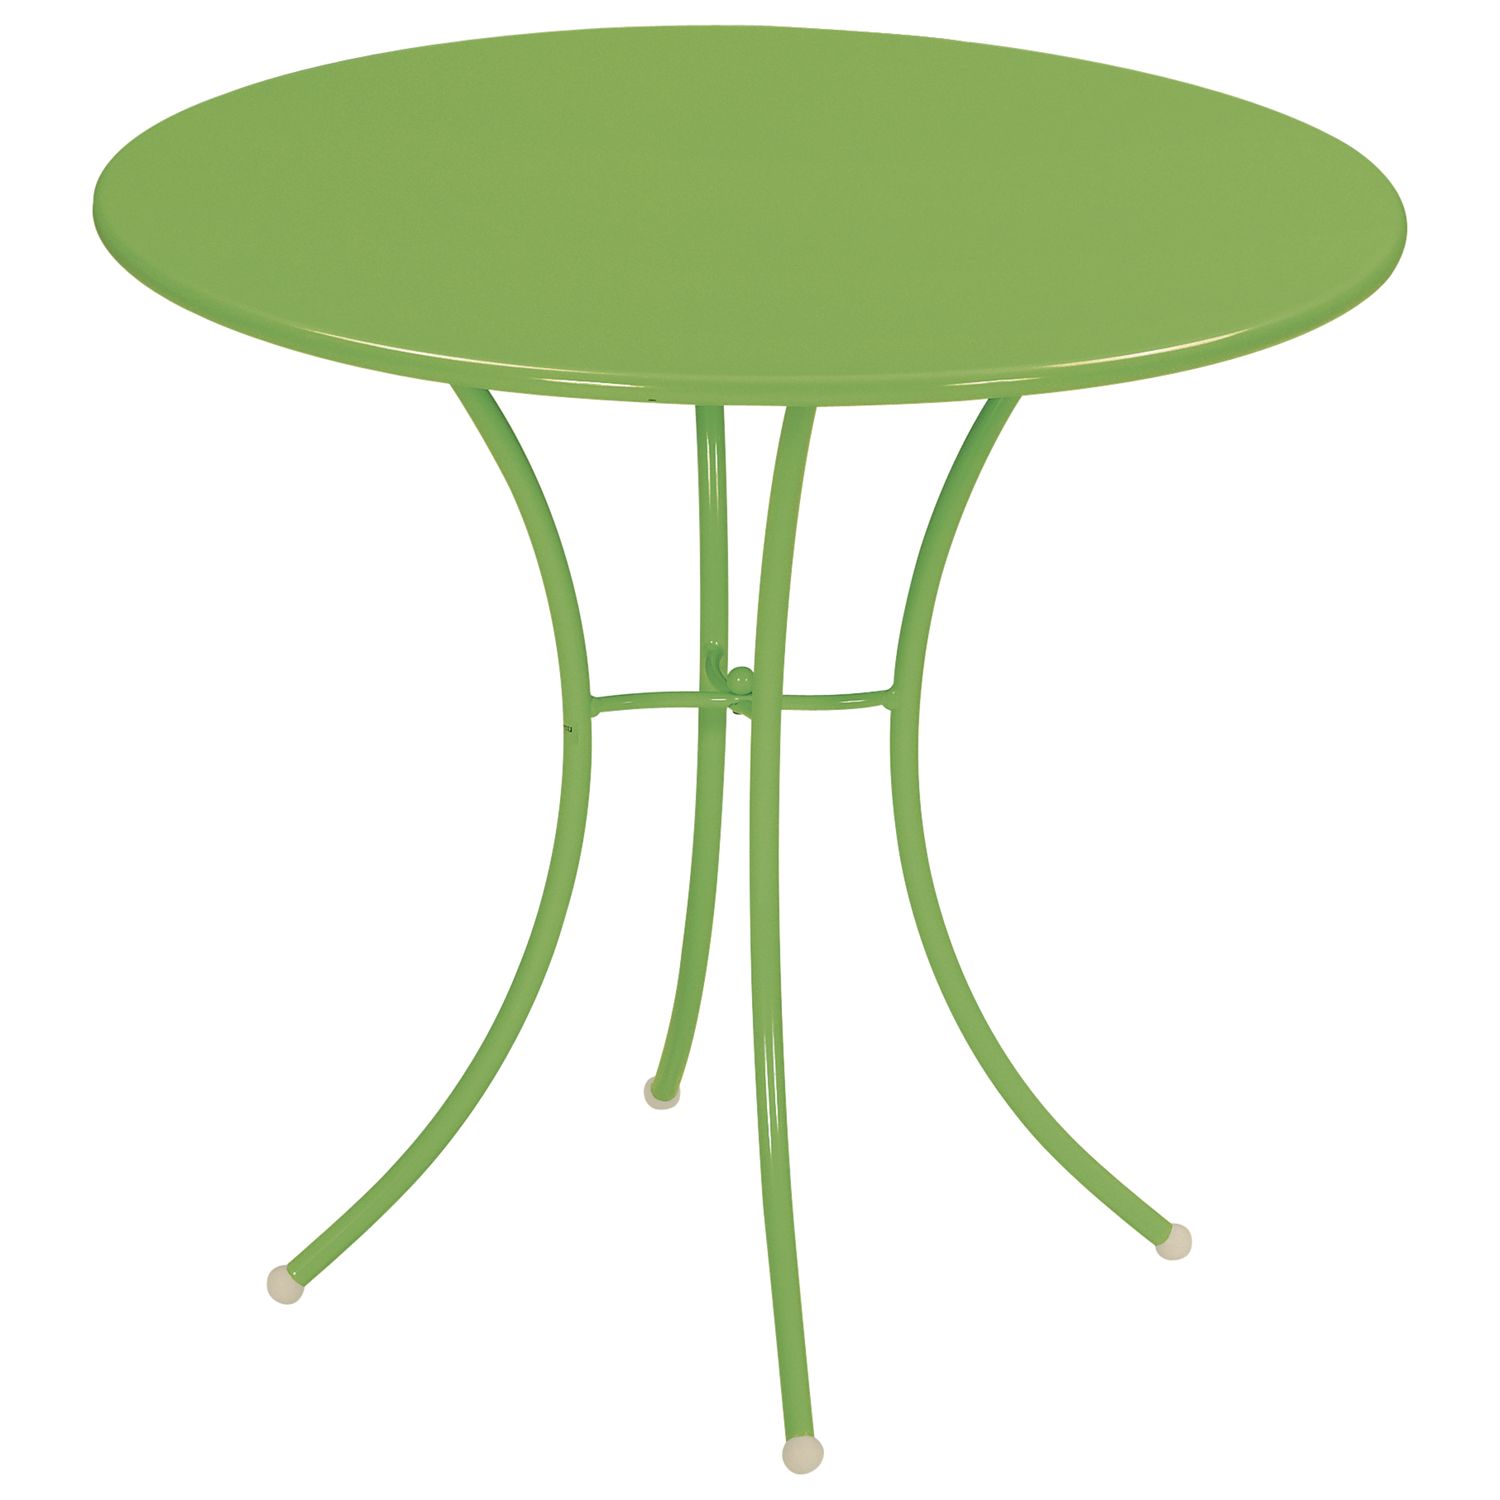 emu Pigalle Round 2 Seater Outdoor Dining Table, Green, width 80cm